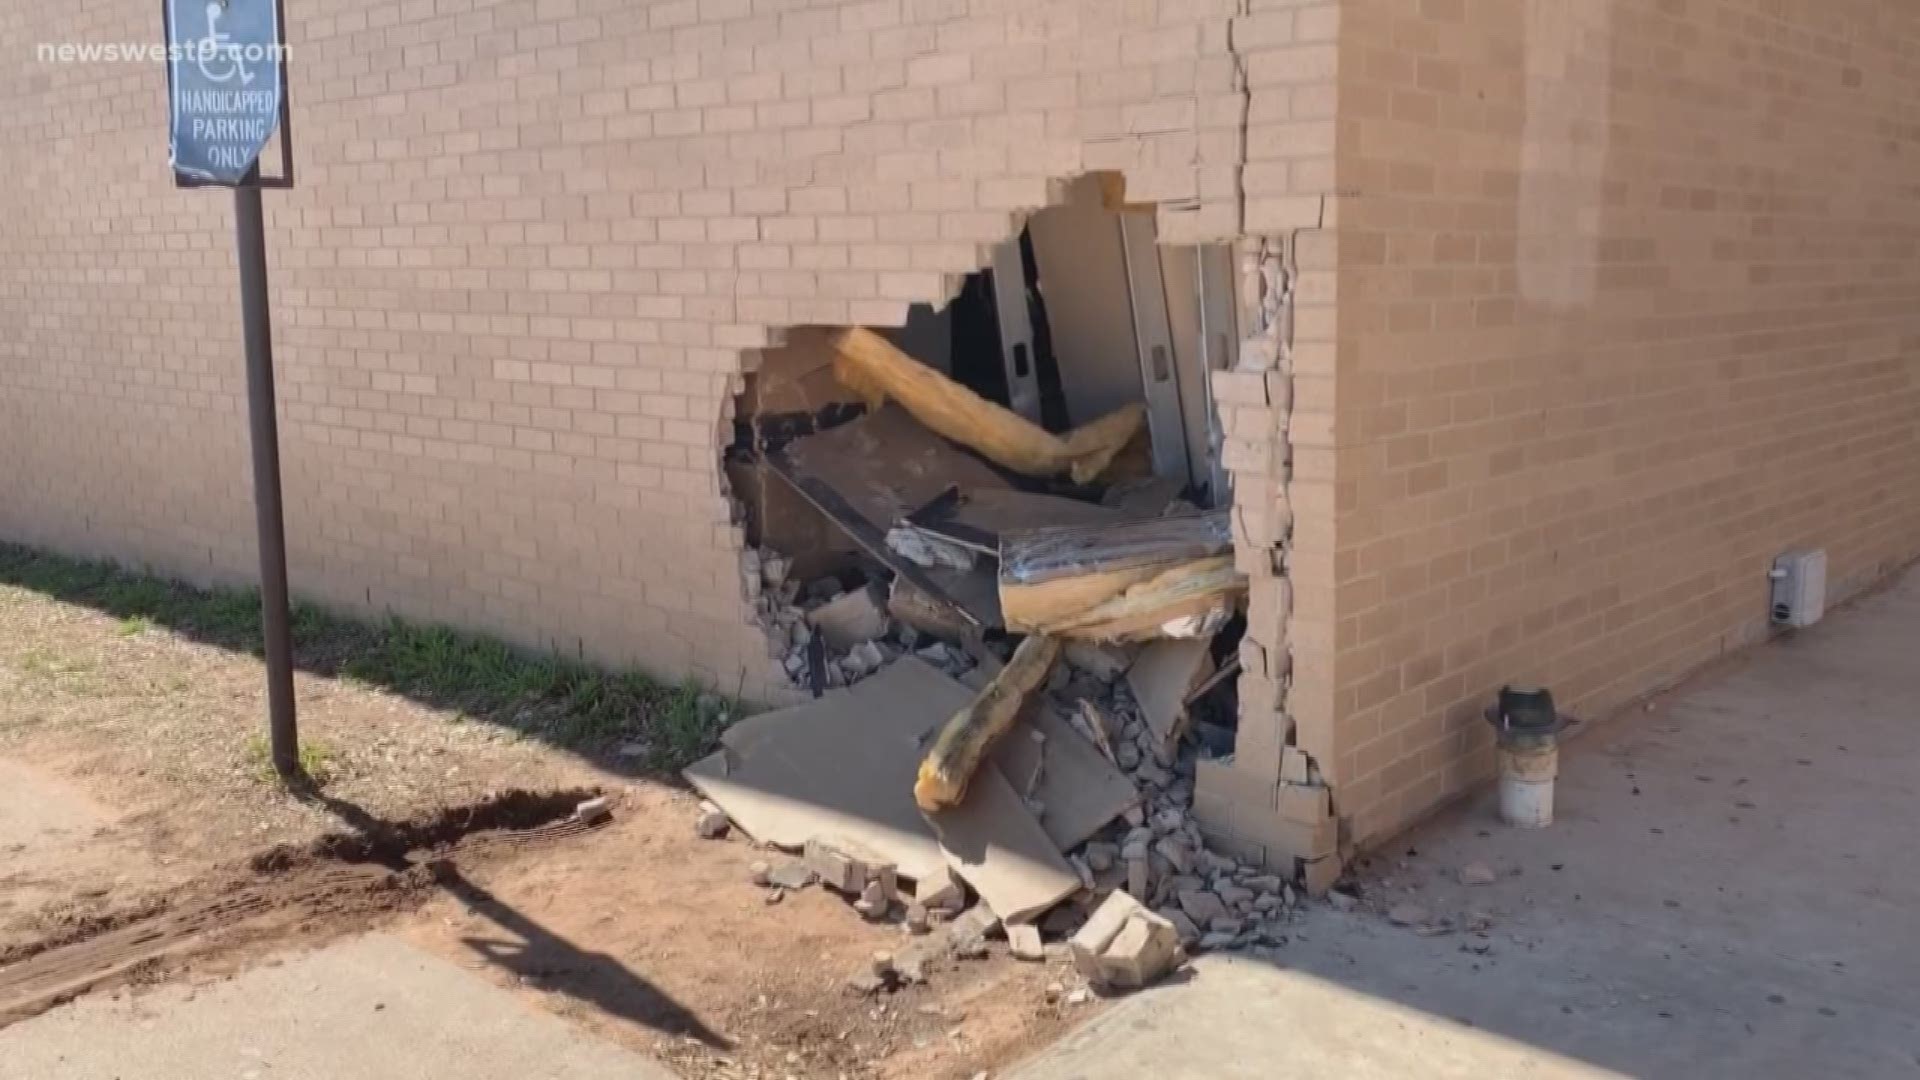 Odessa police is still investigating what led to the car crash into school.